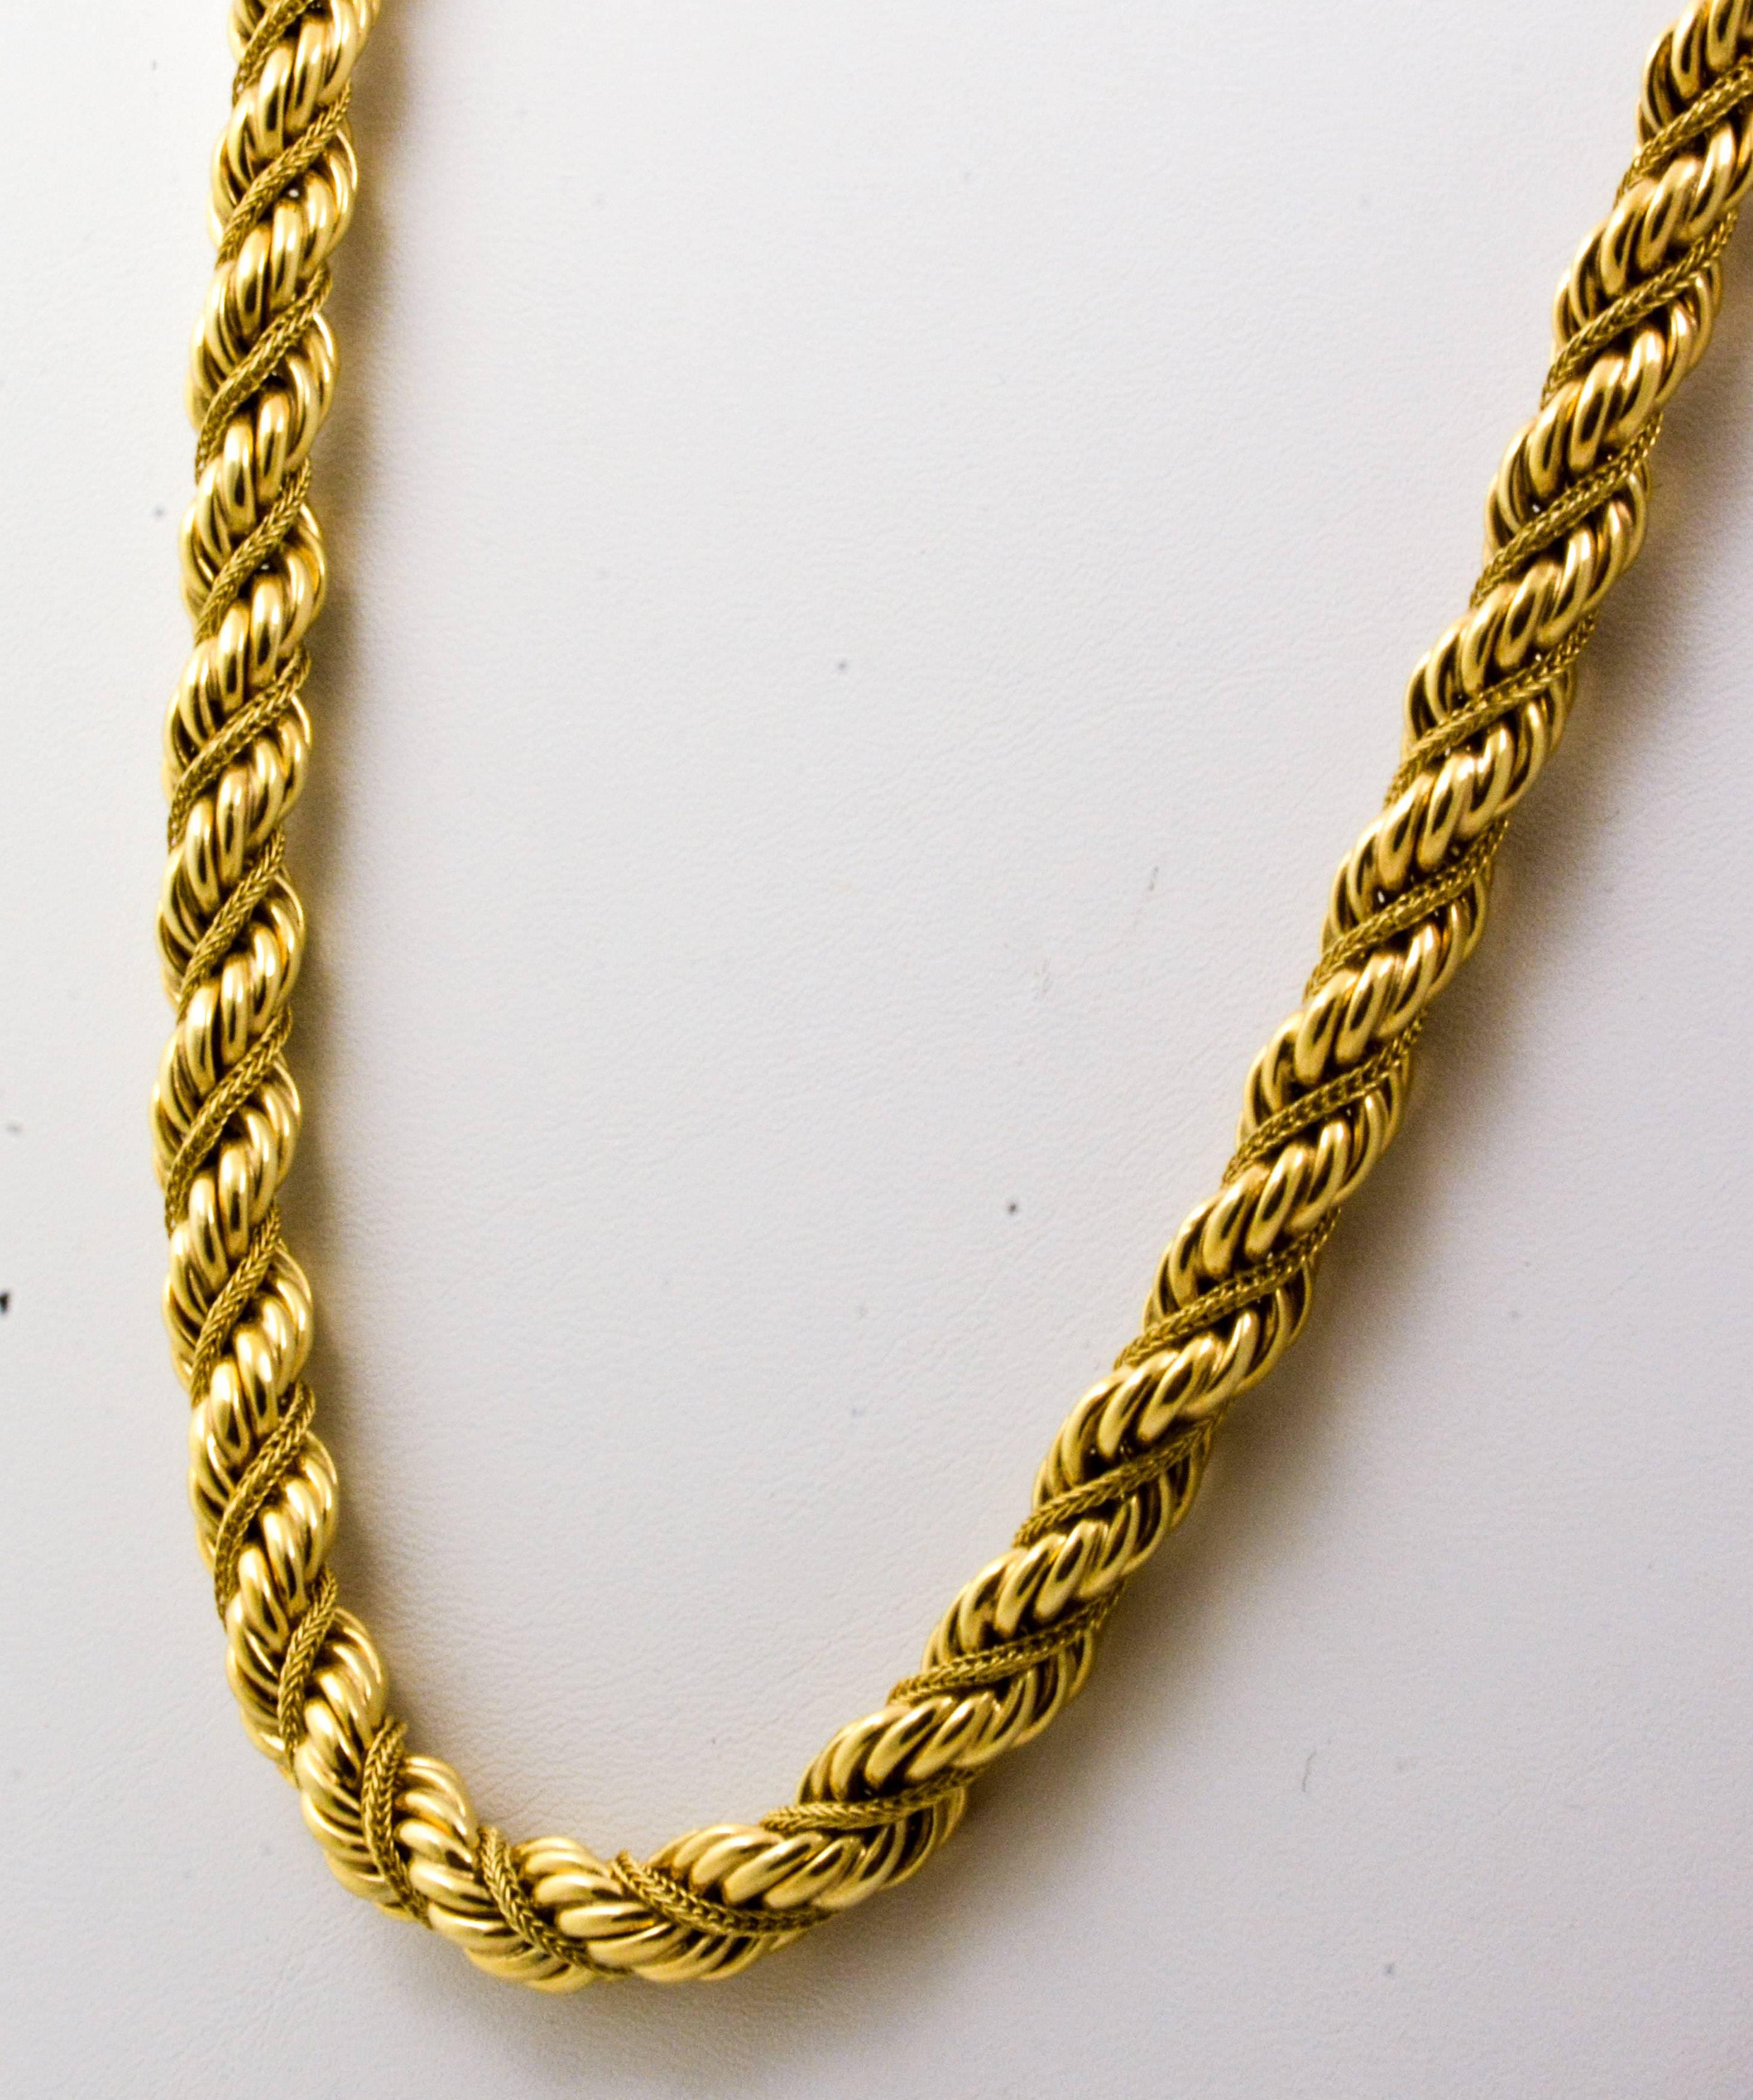 This 14kt yellow gold necklace measures 7.8mm in diameter. The 14kt gold is highlighted with a lovely box chain wrapped tightly in a spiraling rope 15.5 inches in length. Elegant in its simple design, this braided rope necklace is sure to complement